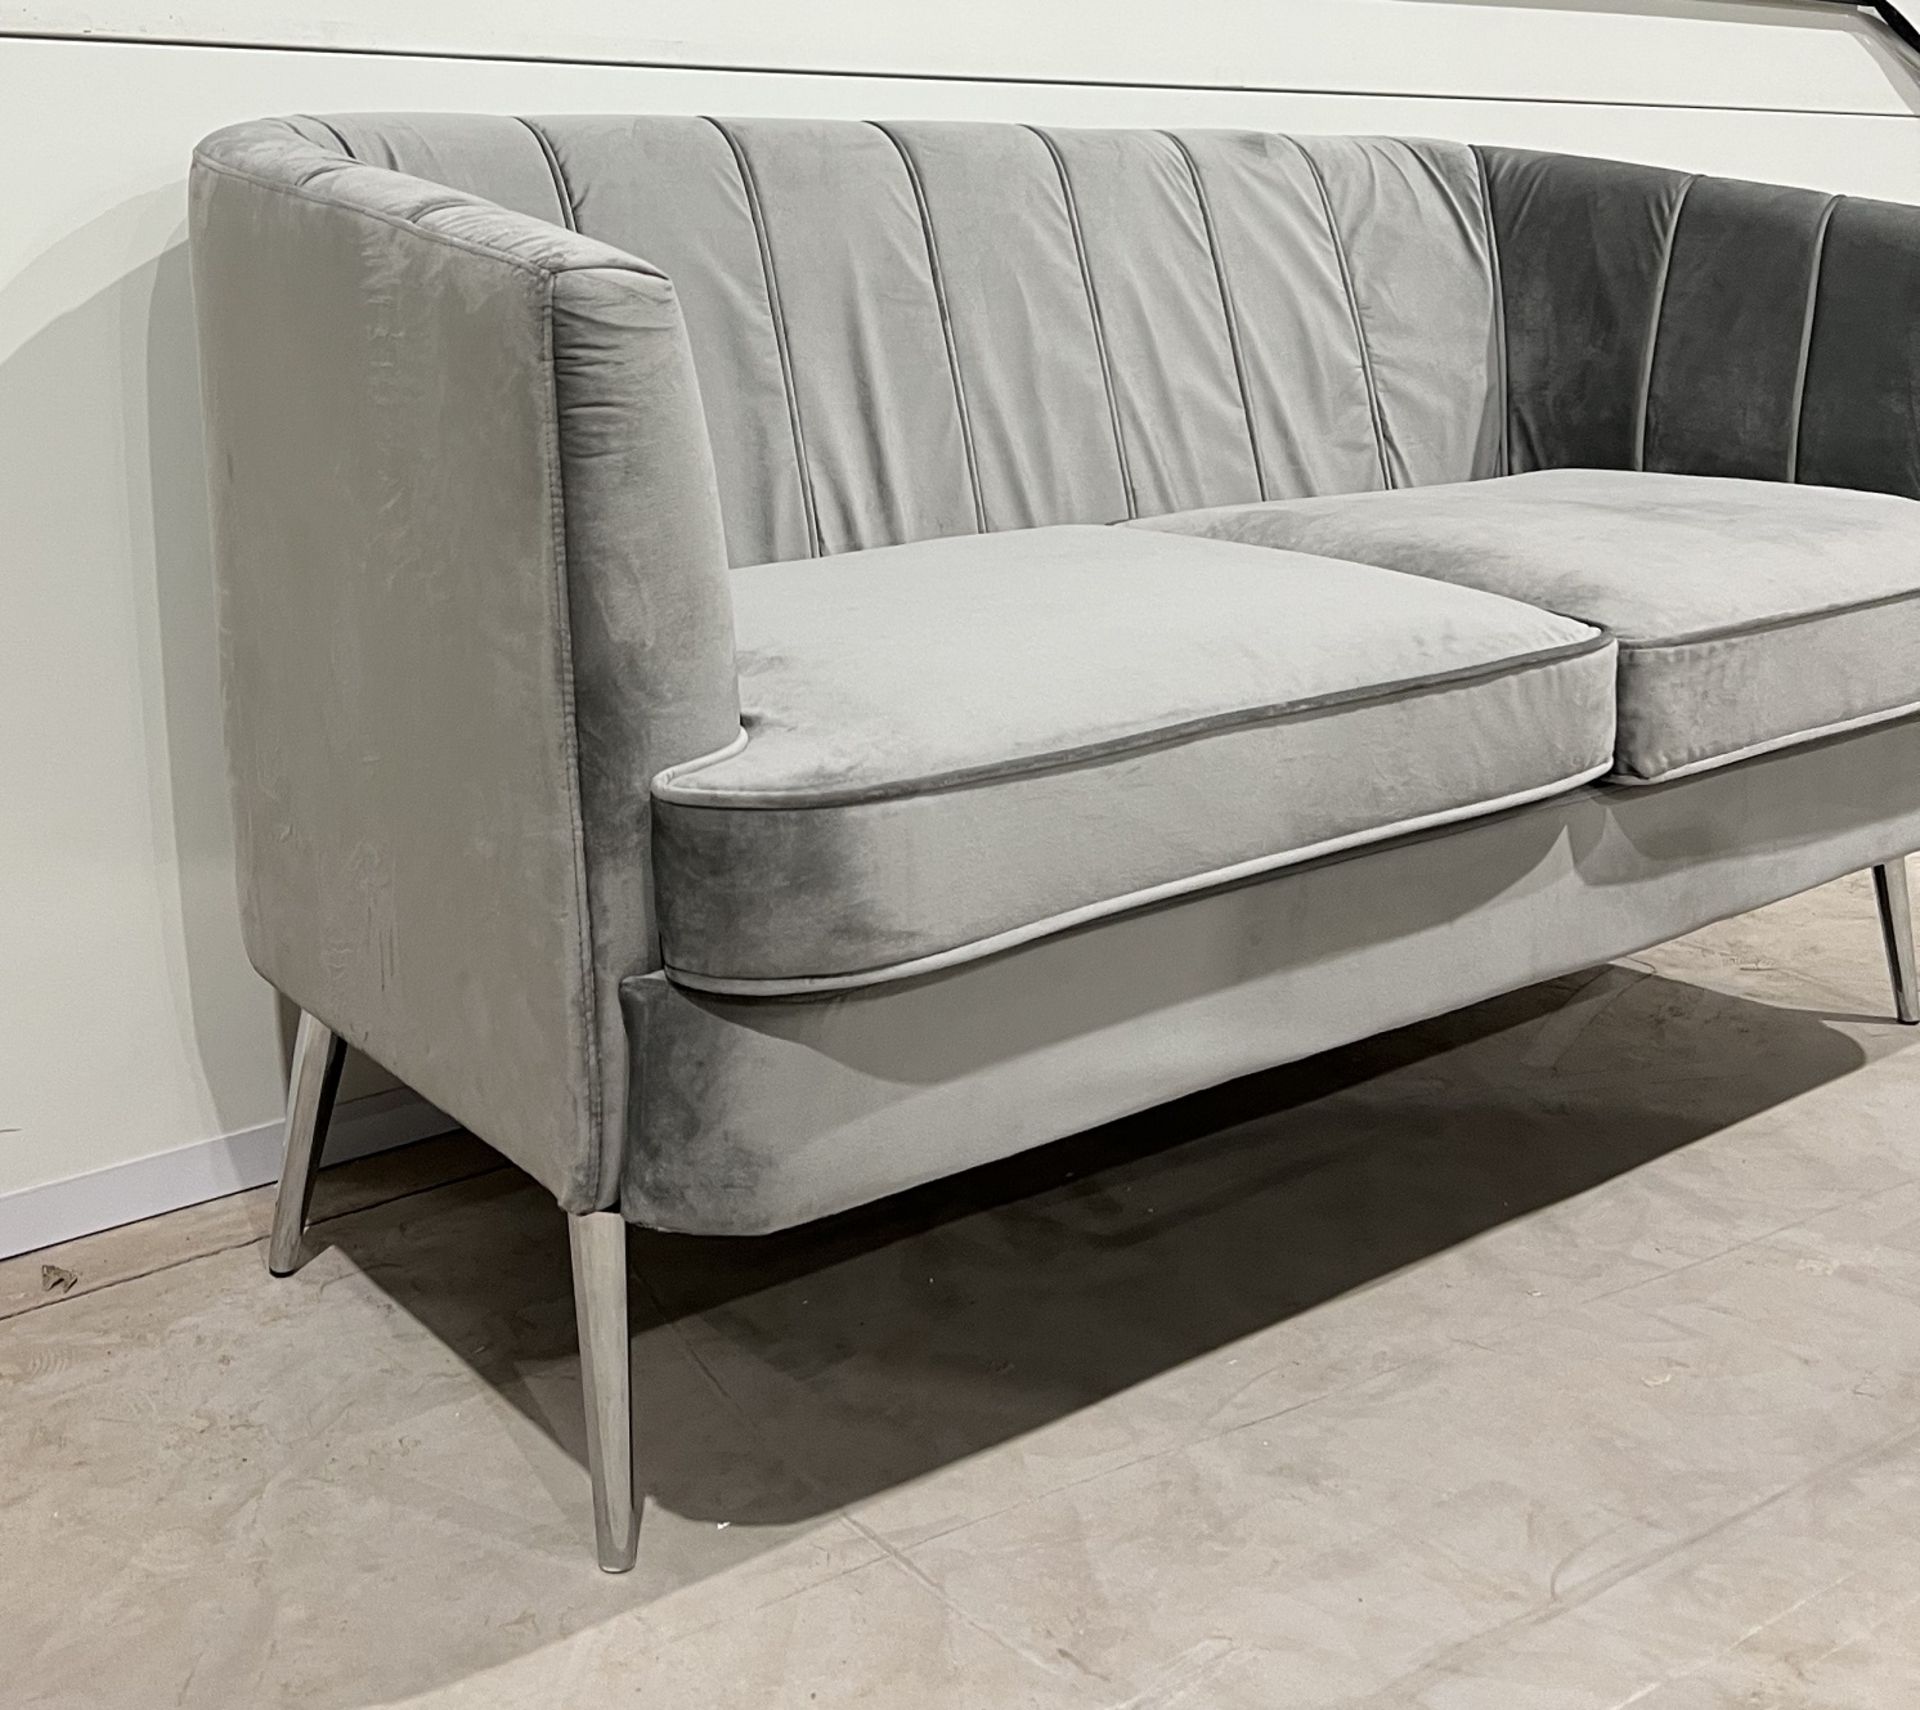 Lulu Sofa In Grey Velvet With Silver Metal Legs Reminiscent Of An Exotic Seashell. Exceptionally - Image 4 of 4